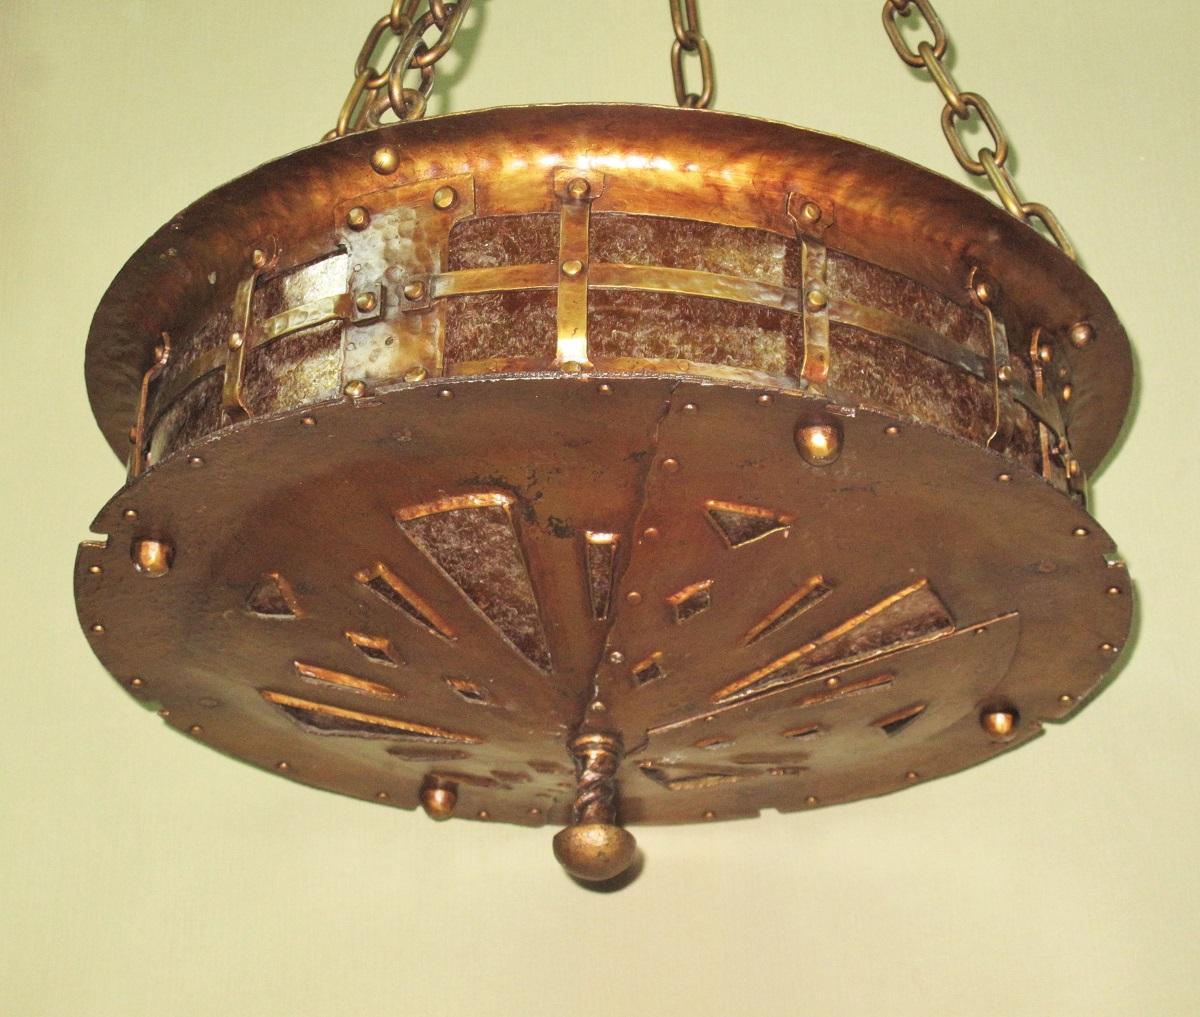 Hammered c.1916 Massive Craftsman Fixture all Hand Wrought Original Finish Two Available  For Sale